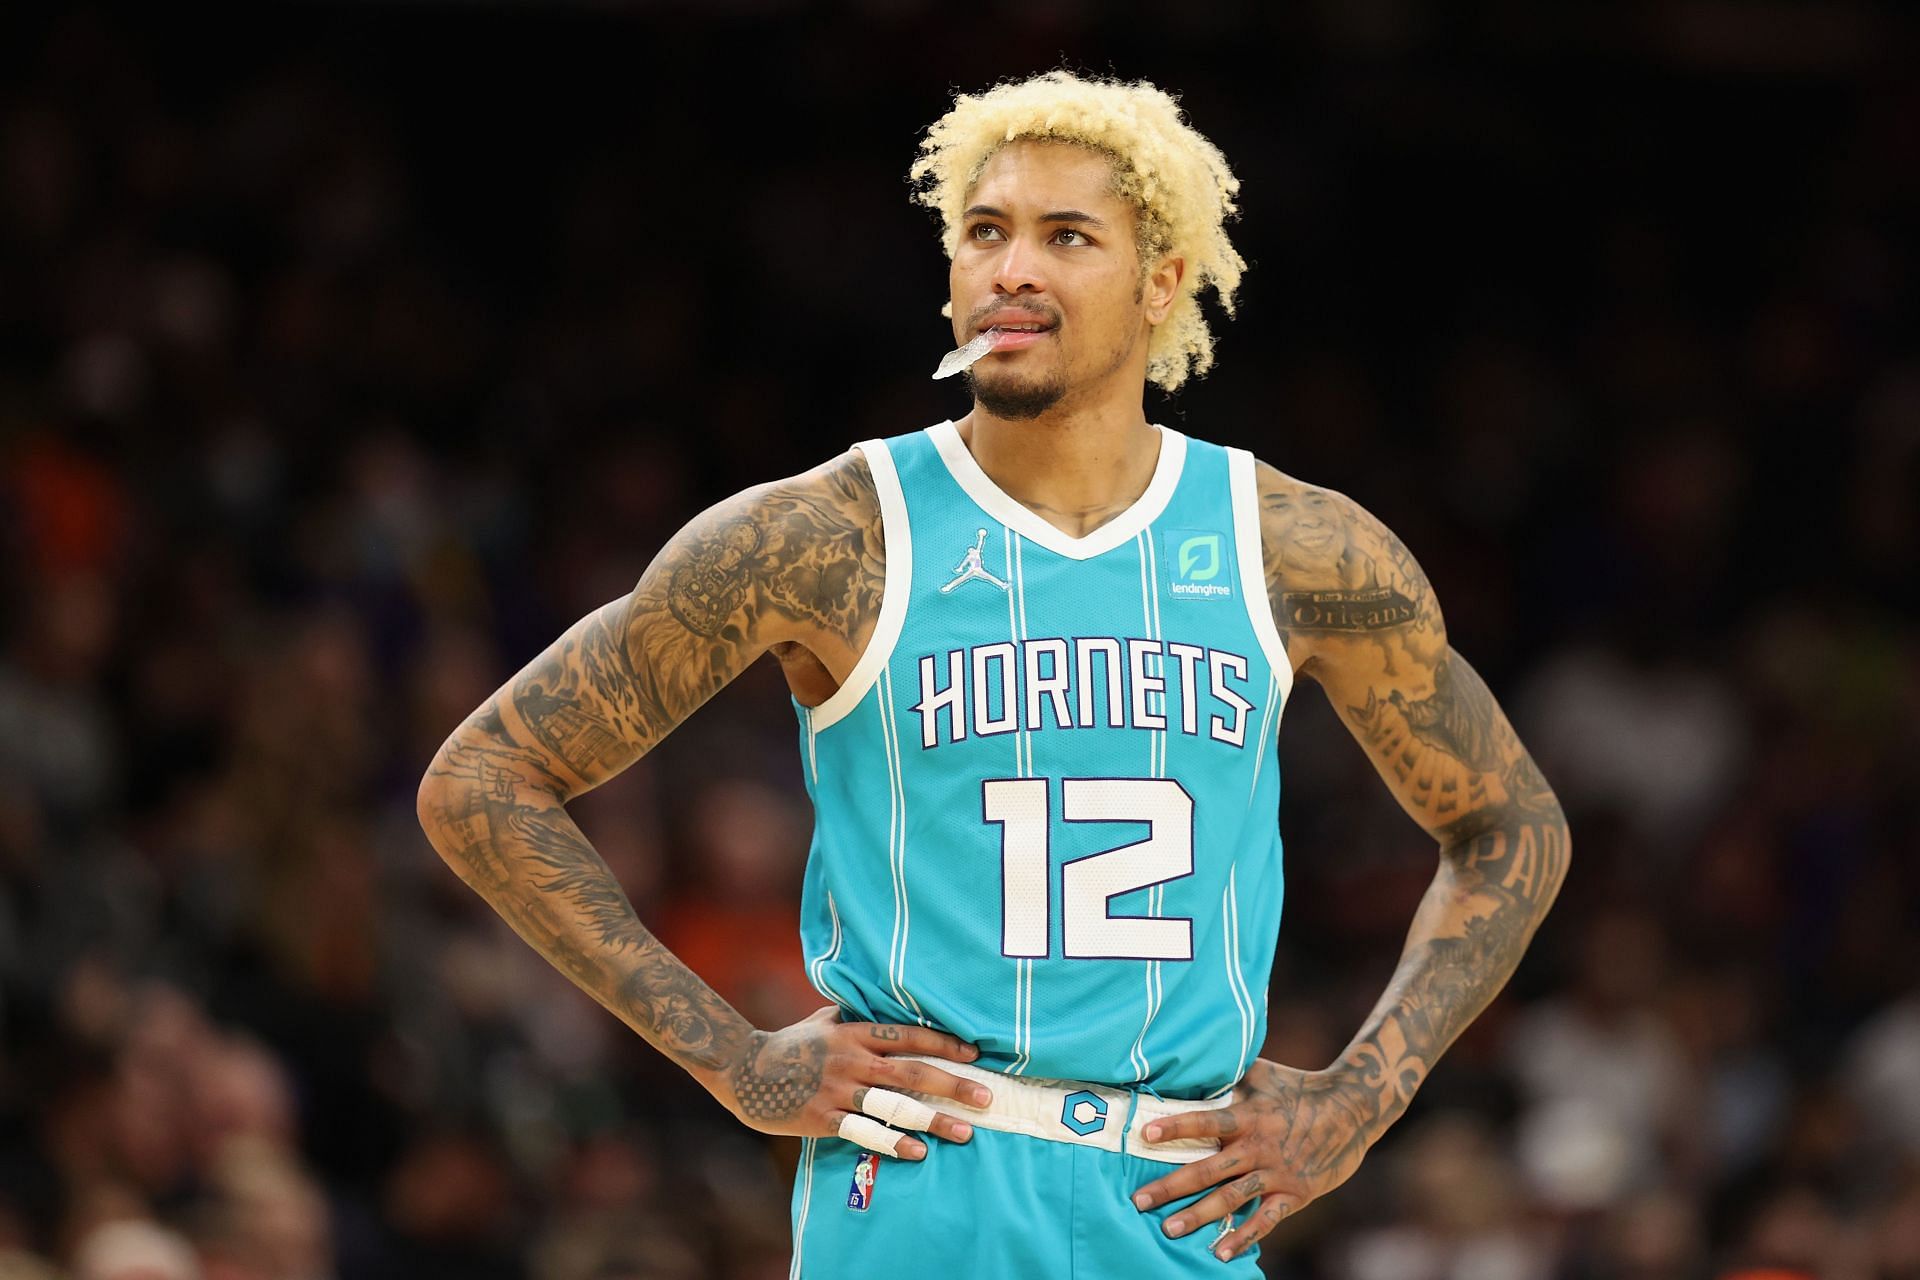 Kelly Oubre of the Charlotte Hornets